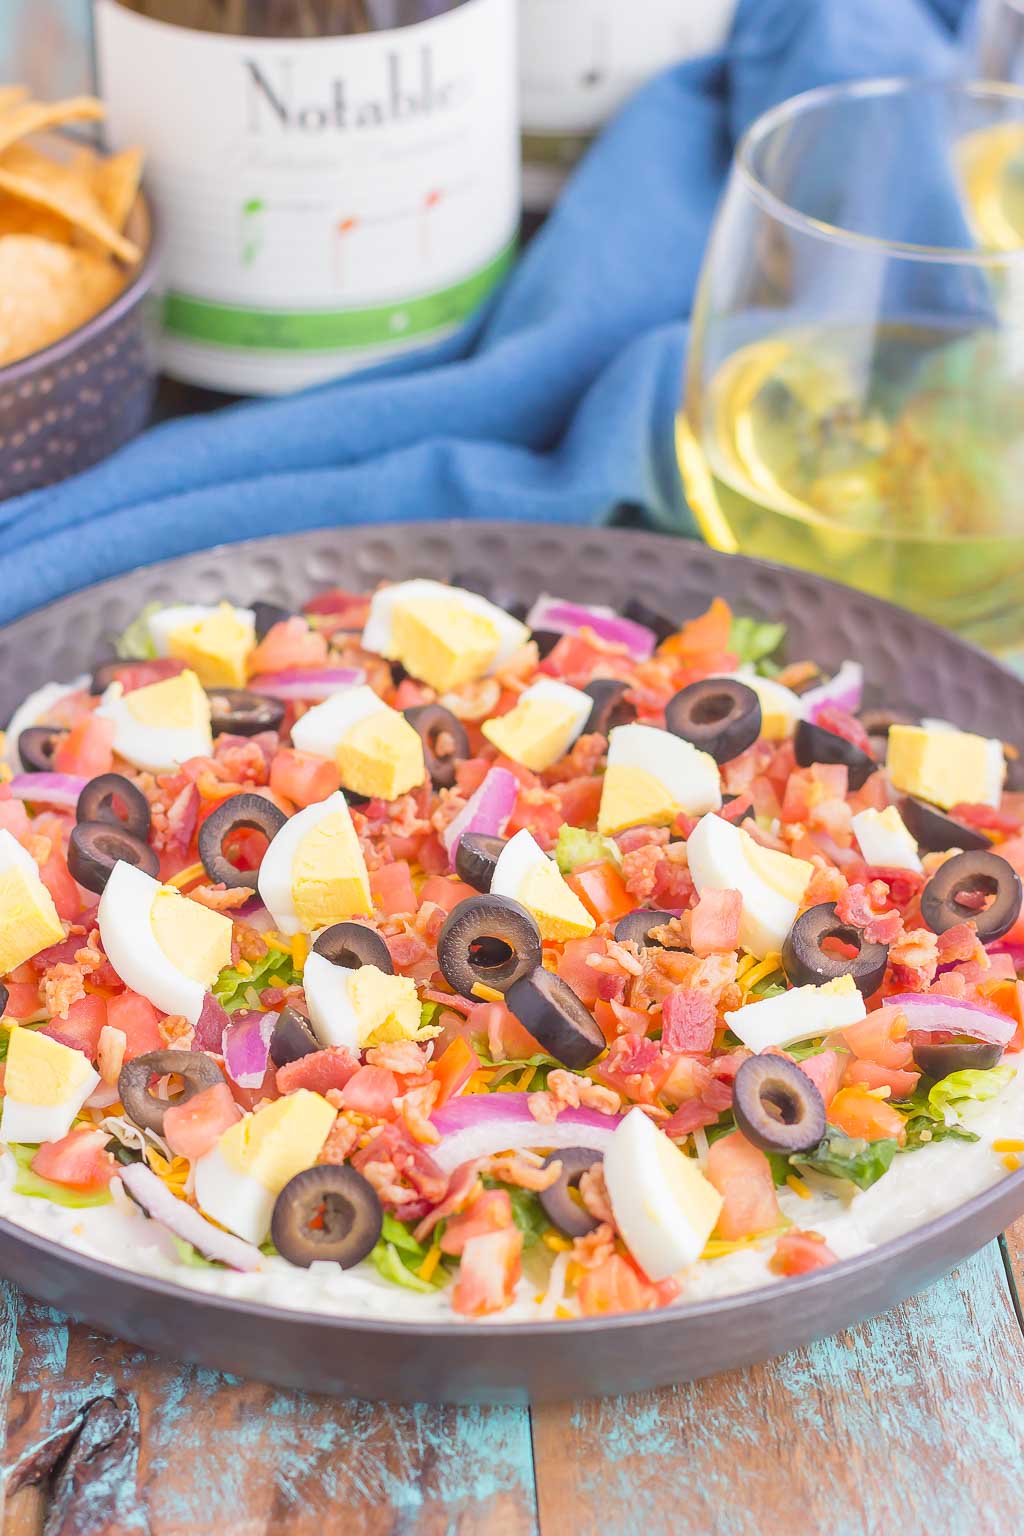 This Cobb Salad Dip is the perfect appetizer for parties, events, and get-togethers. A zesty ranch dip is loaded with the classic flavors of a Cobb salad and is sure to impress even the pickiest of eaters!